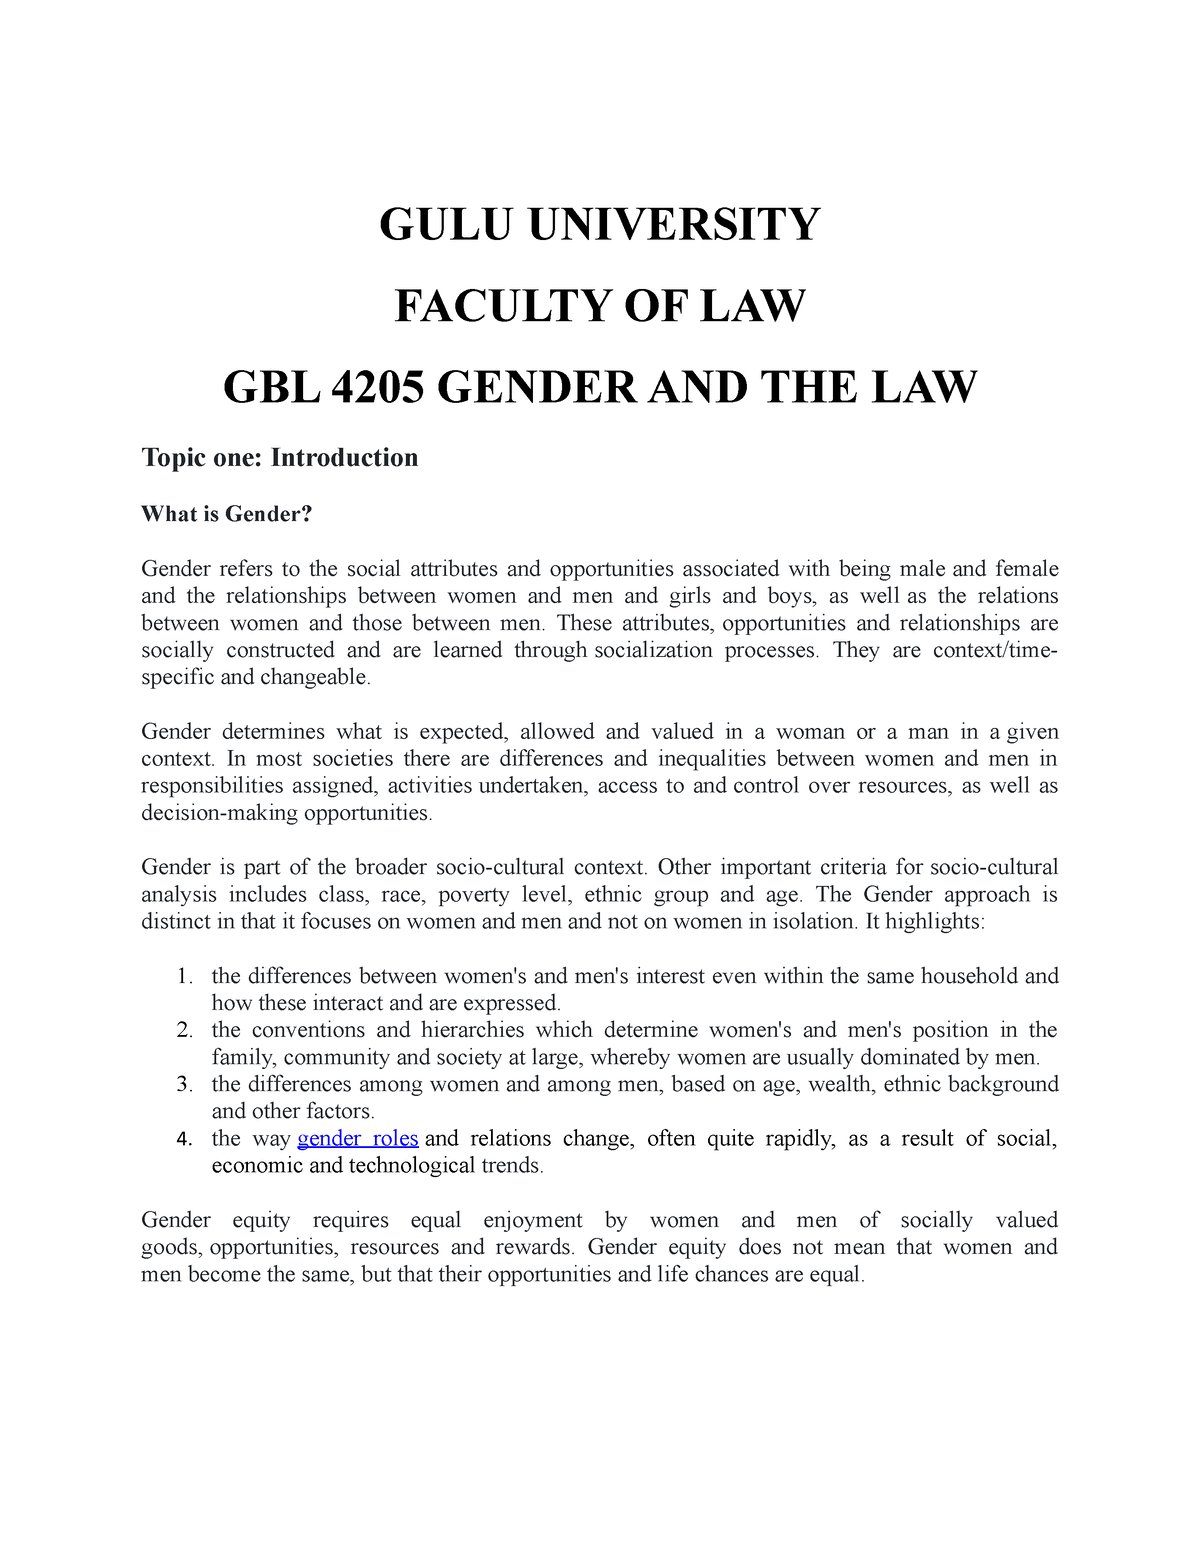 gender and the law dissertation topics